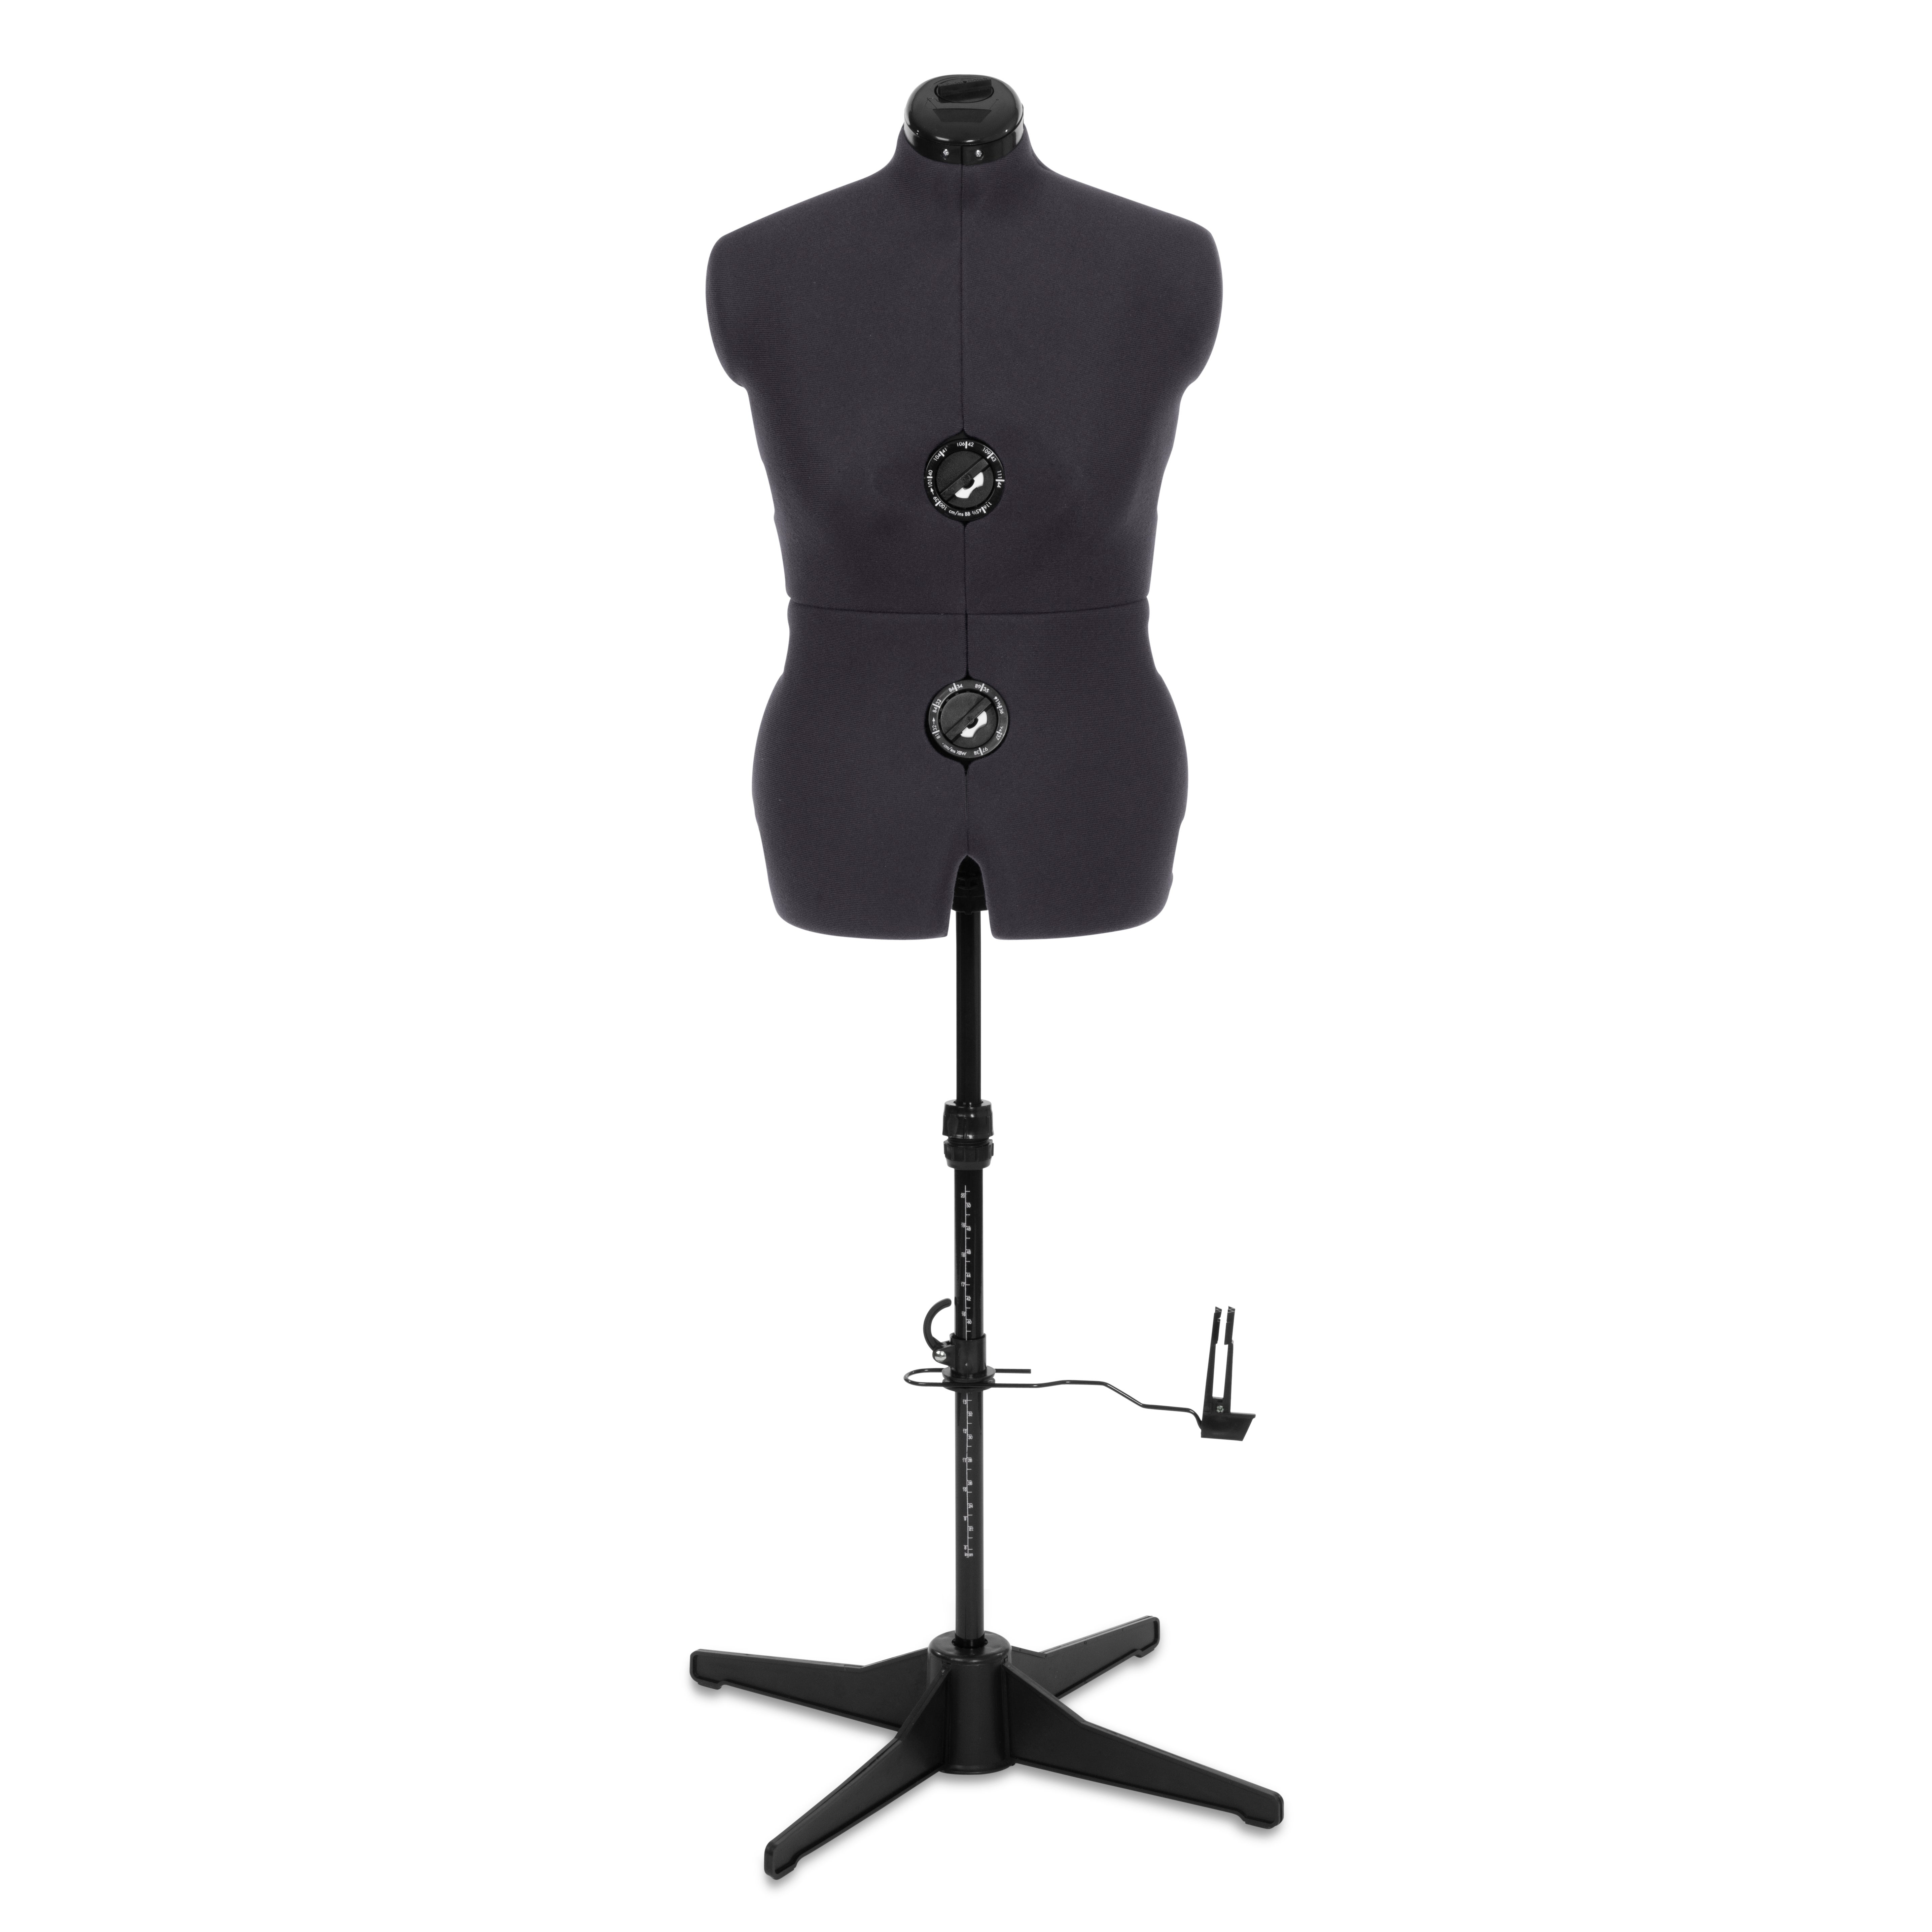 Tailormaid Charcoal Adjustable Tailors Dummy